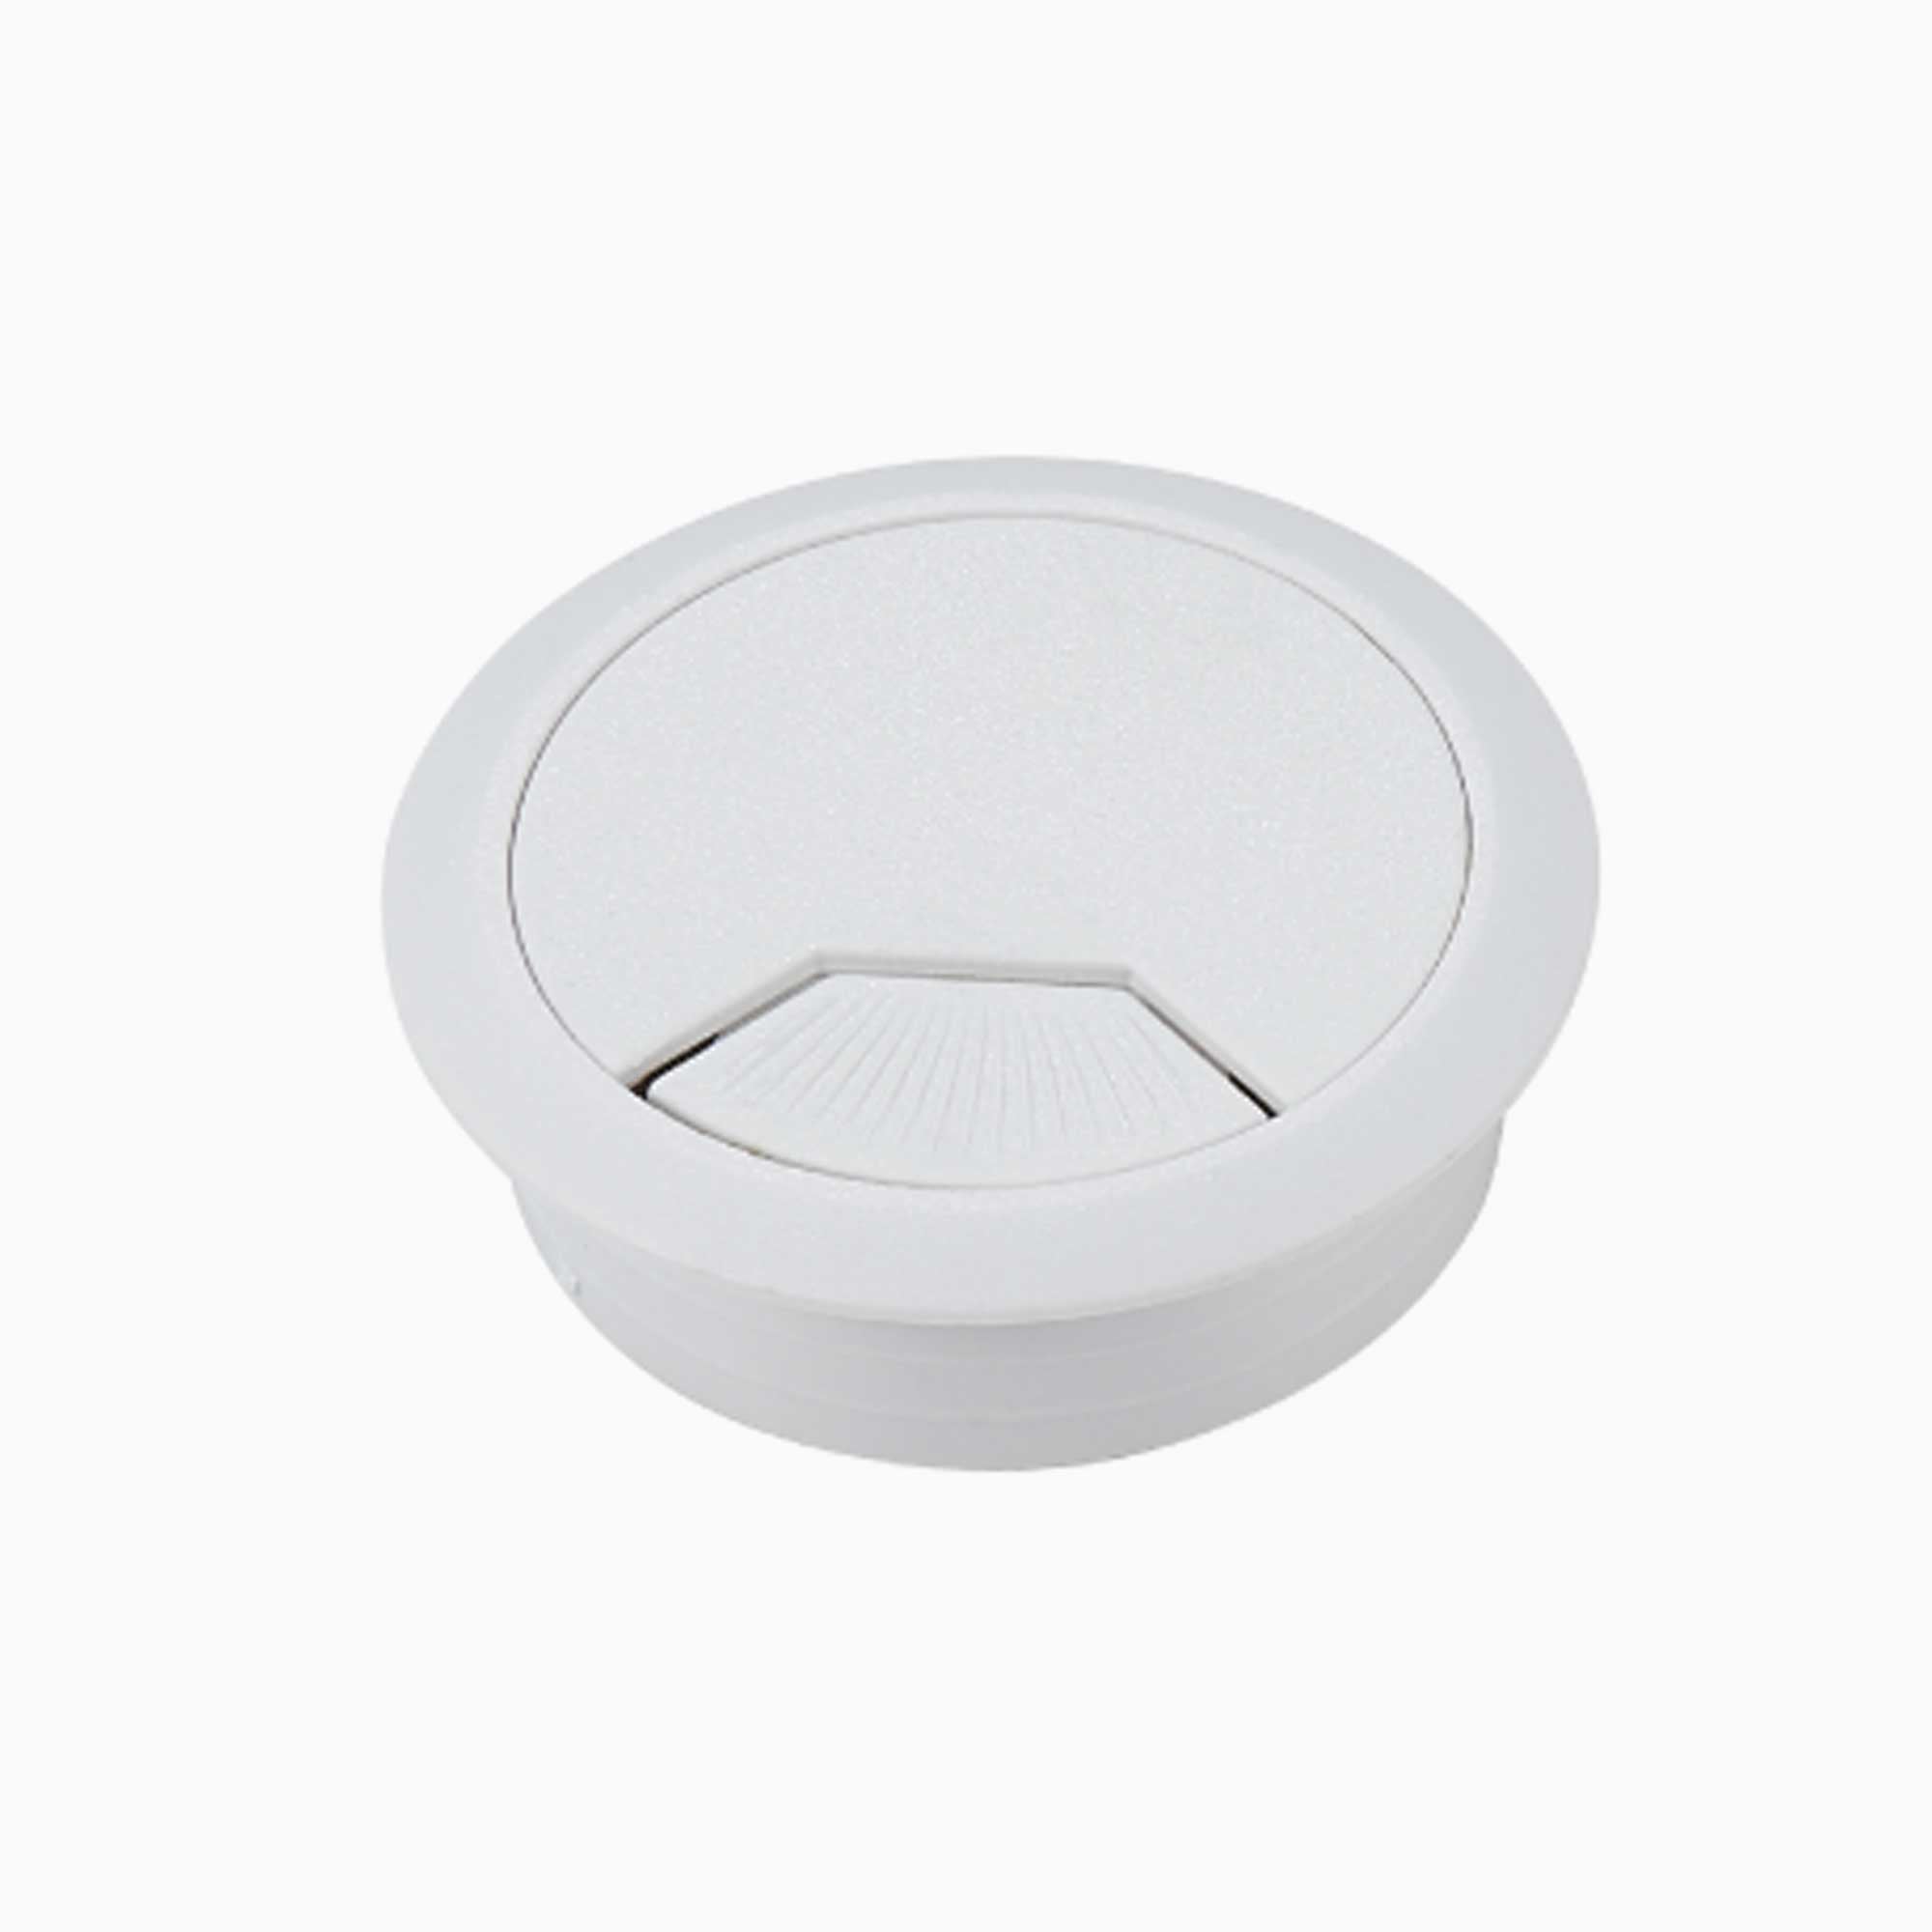 Nixnine Cable Manager Cable Hole Cover Grommet Wire Cable